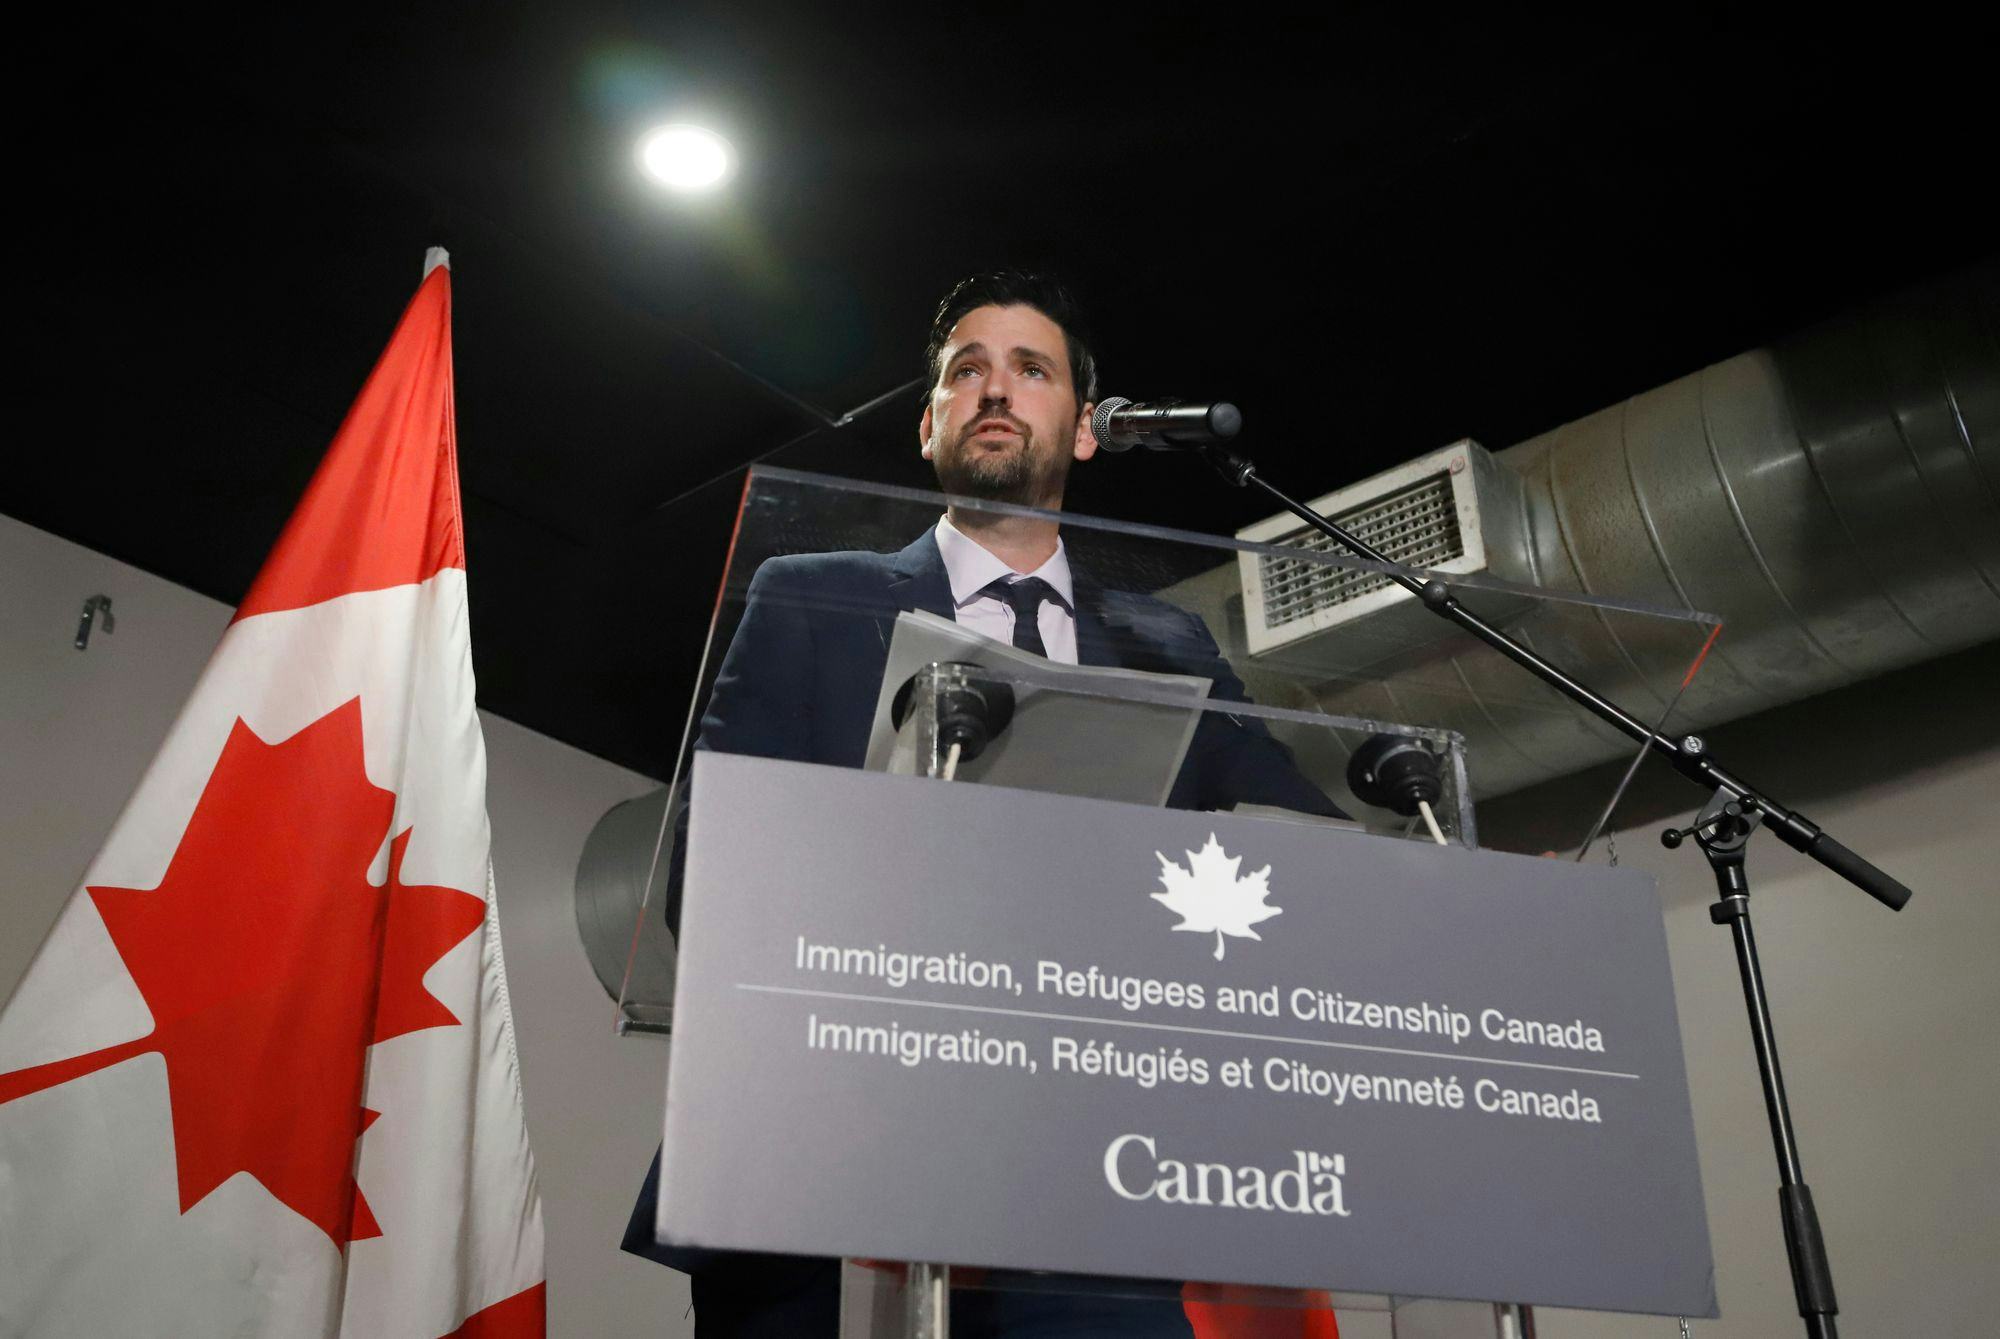 Record number of permanent residents accepted amid push to bring more immigrants to Canada